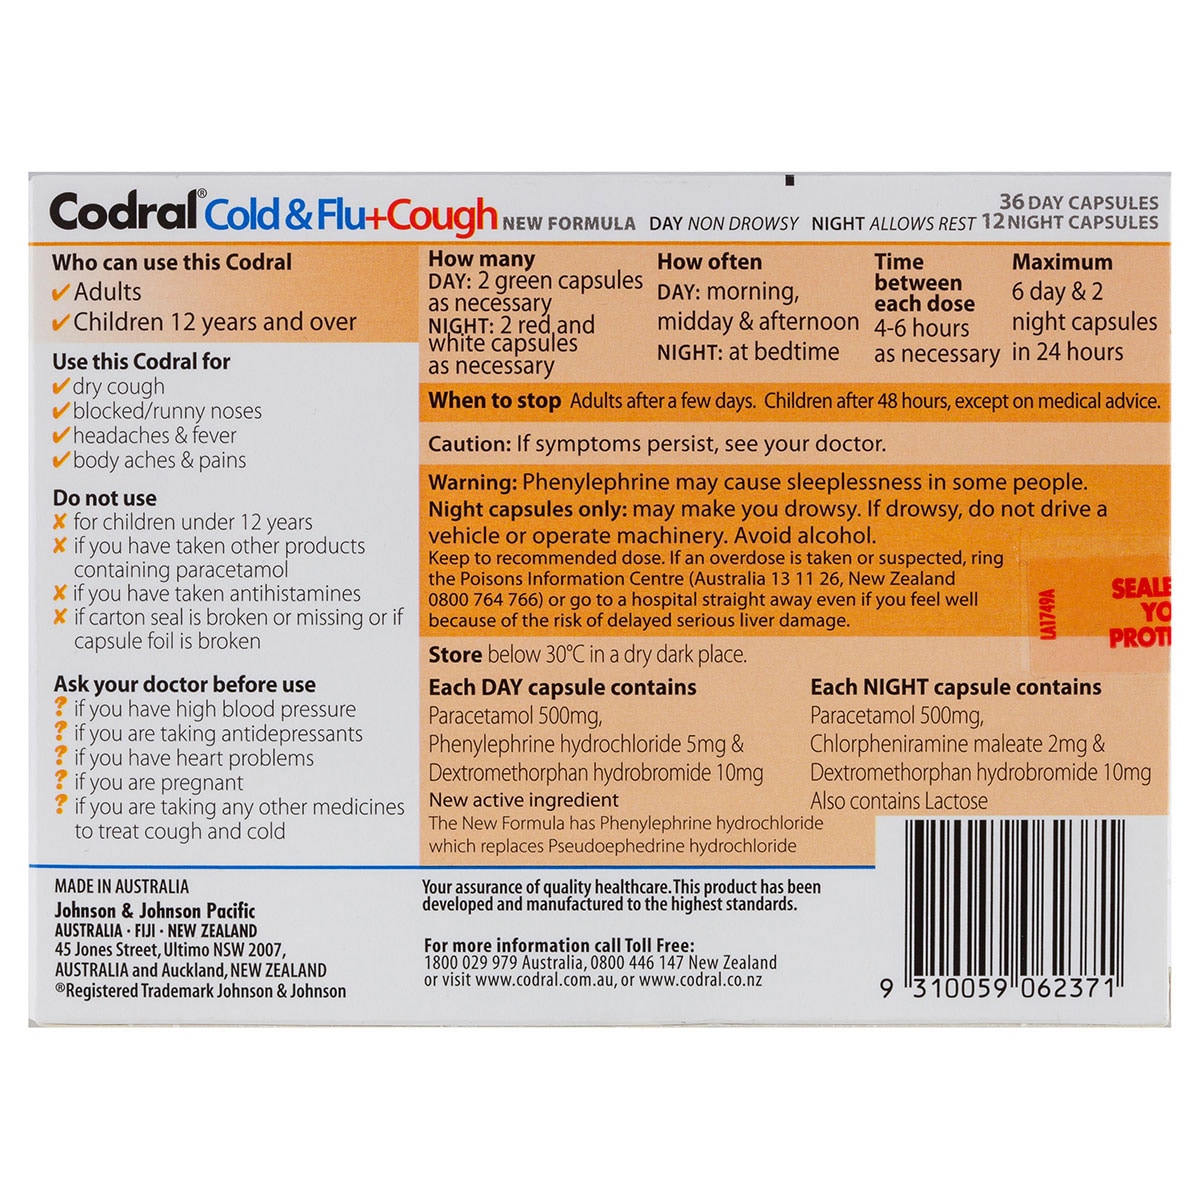 Codral Day & Night + Dry Cough Cold & Flu 48 Capsules